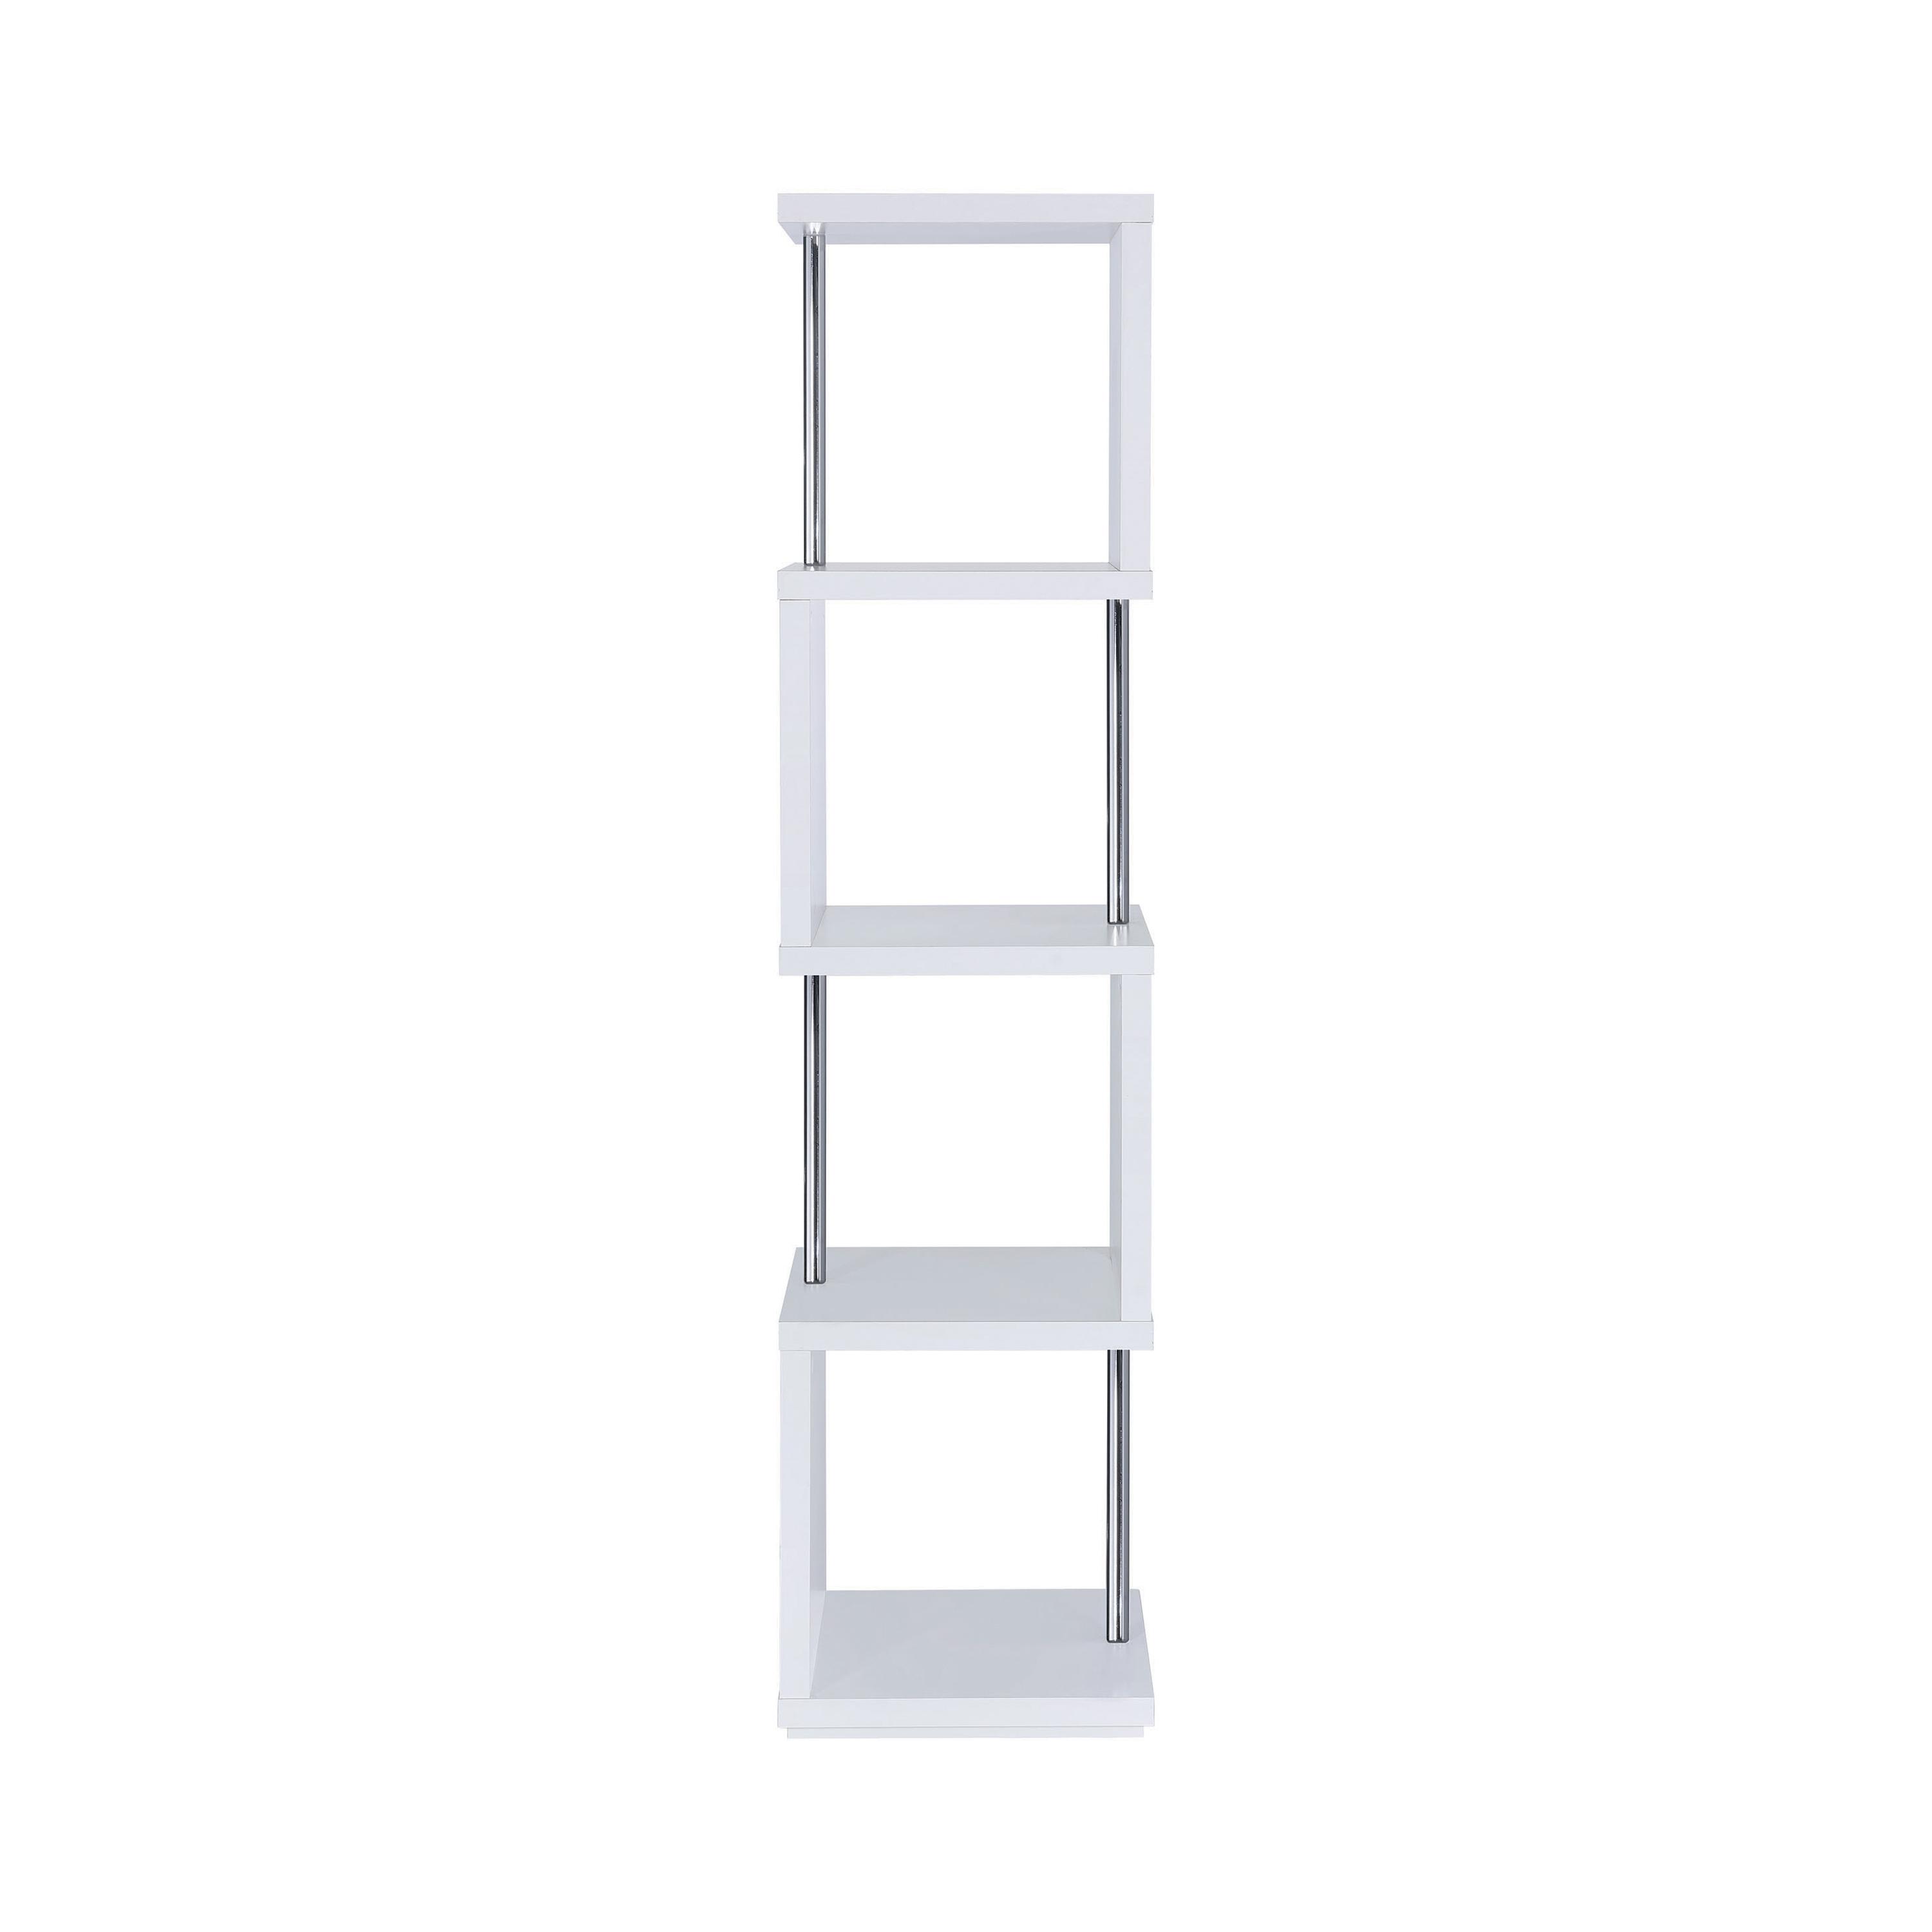 Contemporary Bookcase 801418 Baxter 801418 in White 